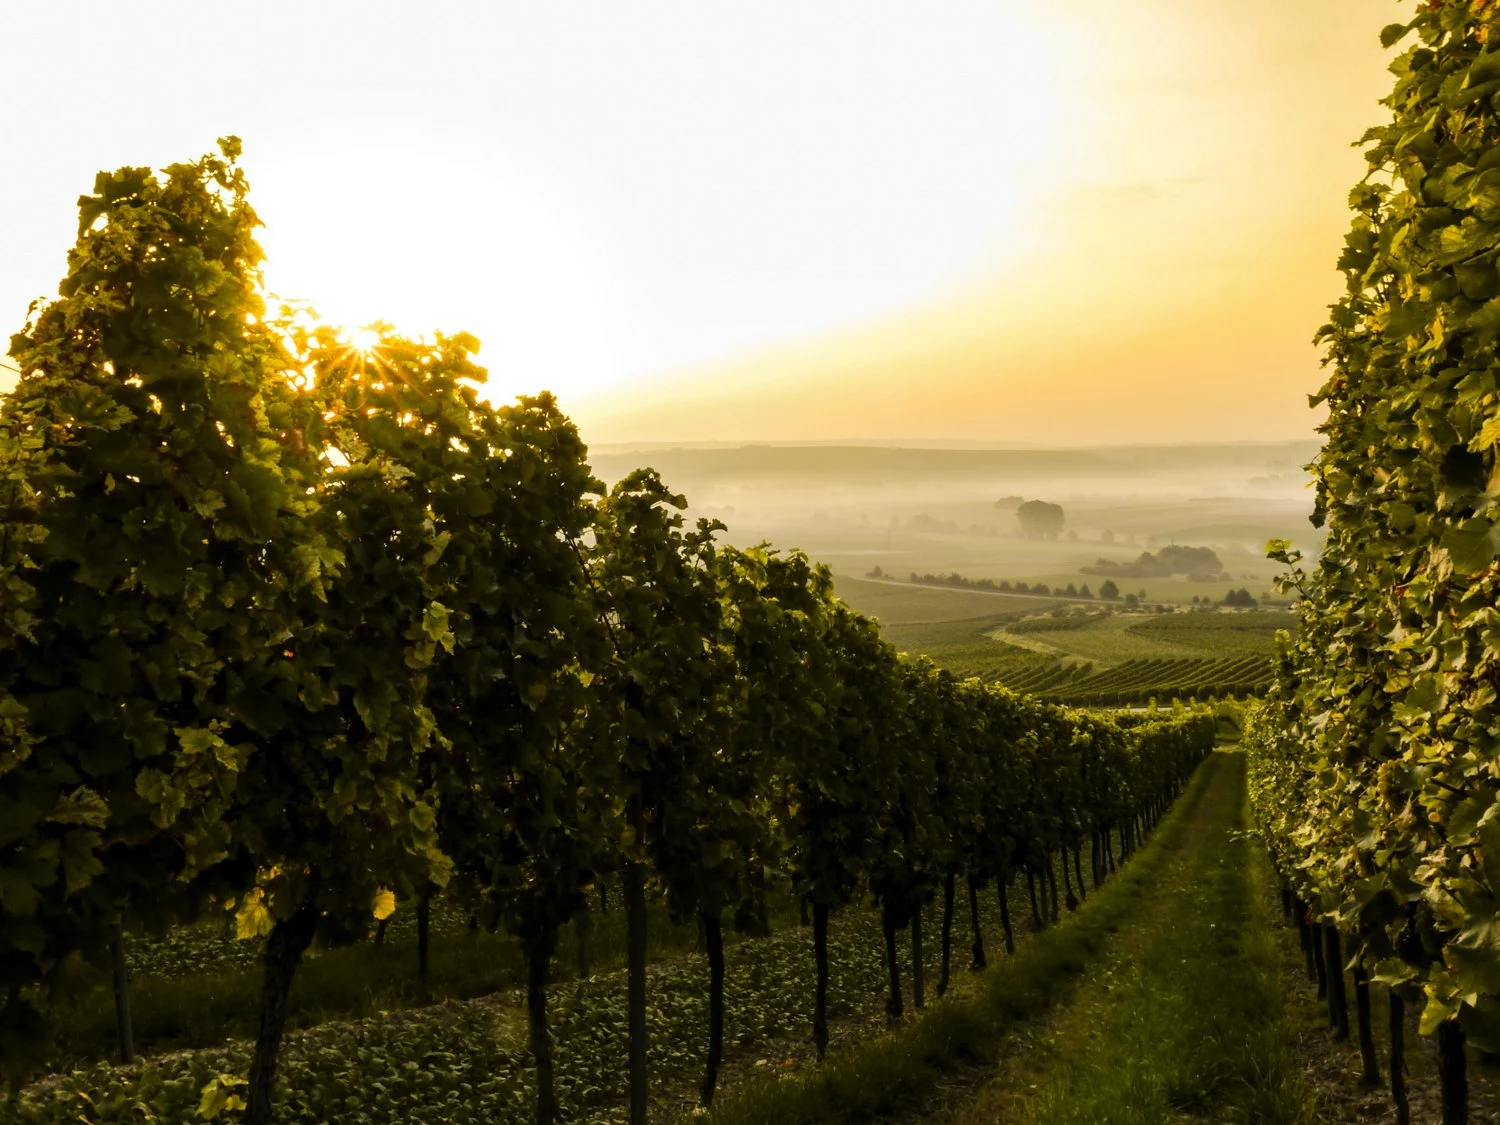 A vineyard with rows of vines at sunset.